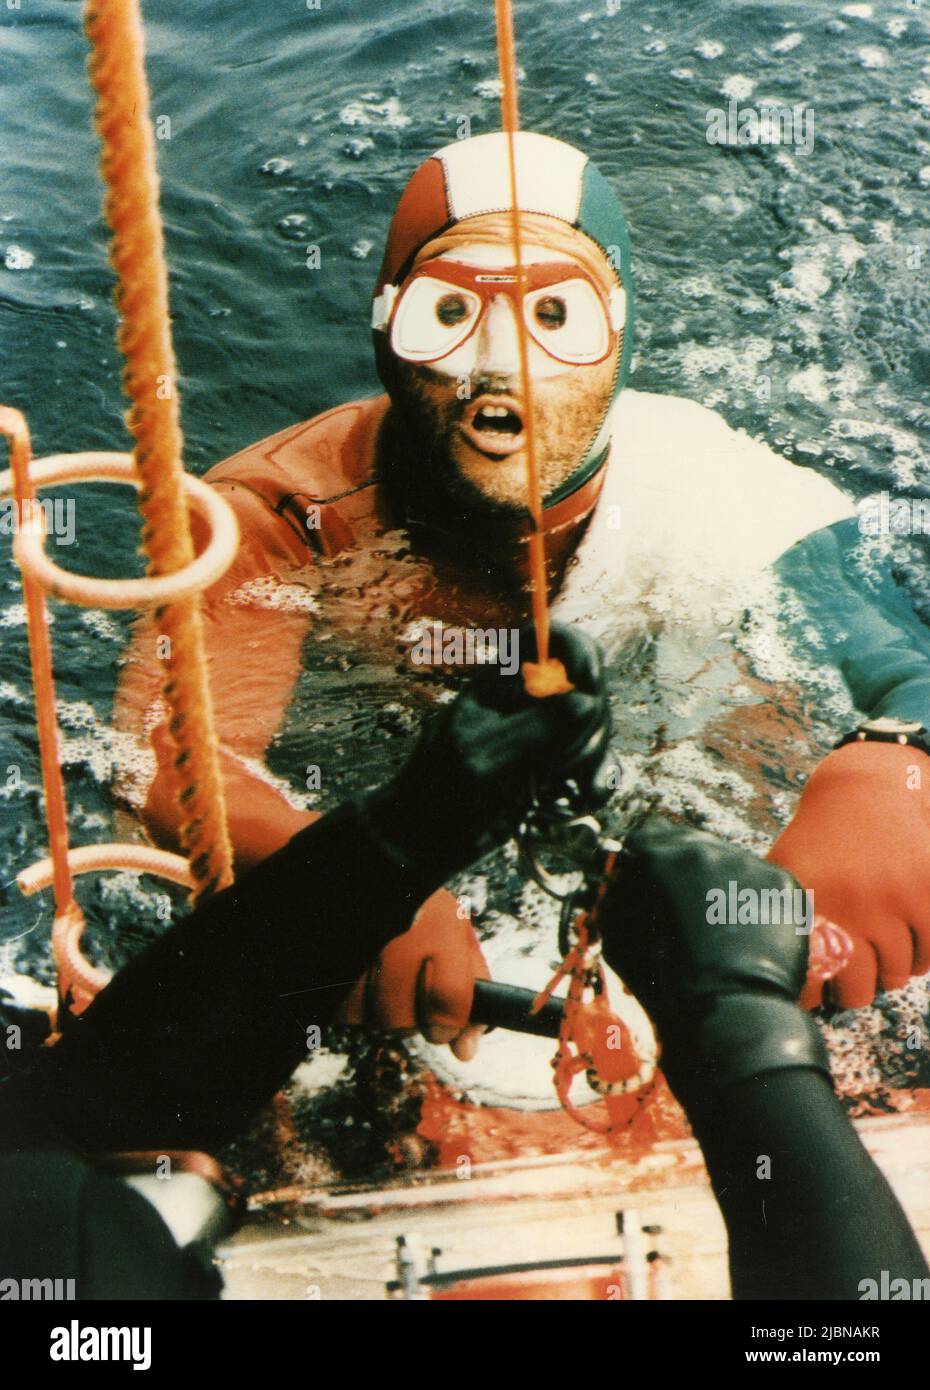 French actor Jean Reno in the movie The Big Blue, France 1988 Stock Photo